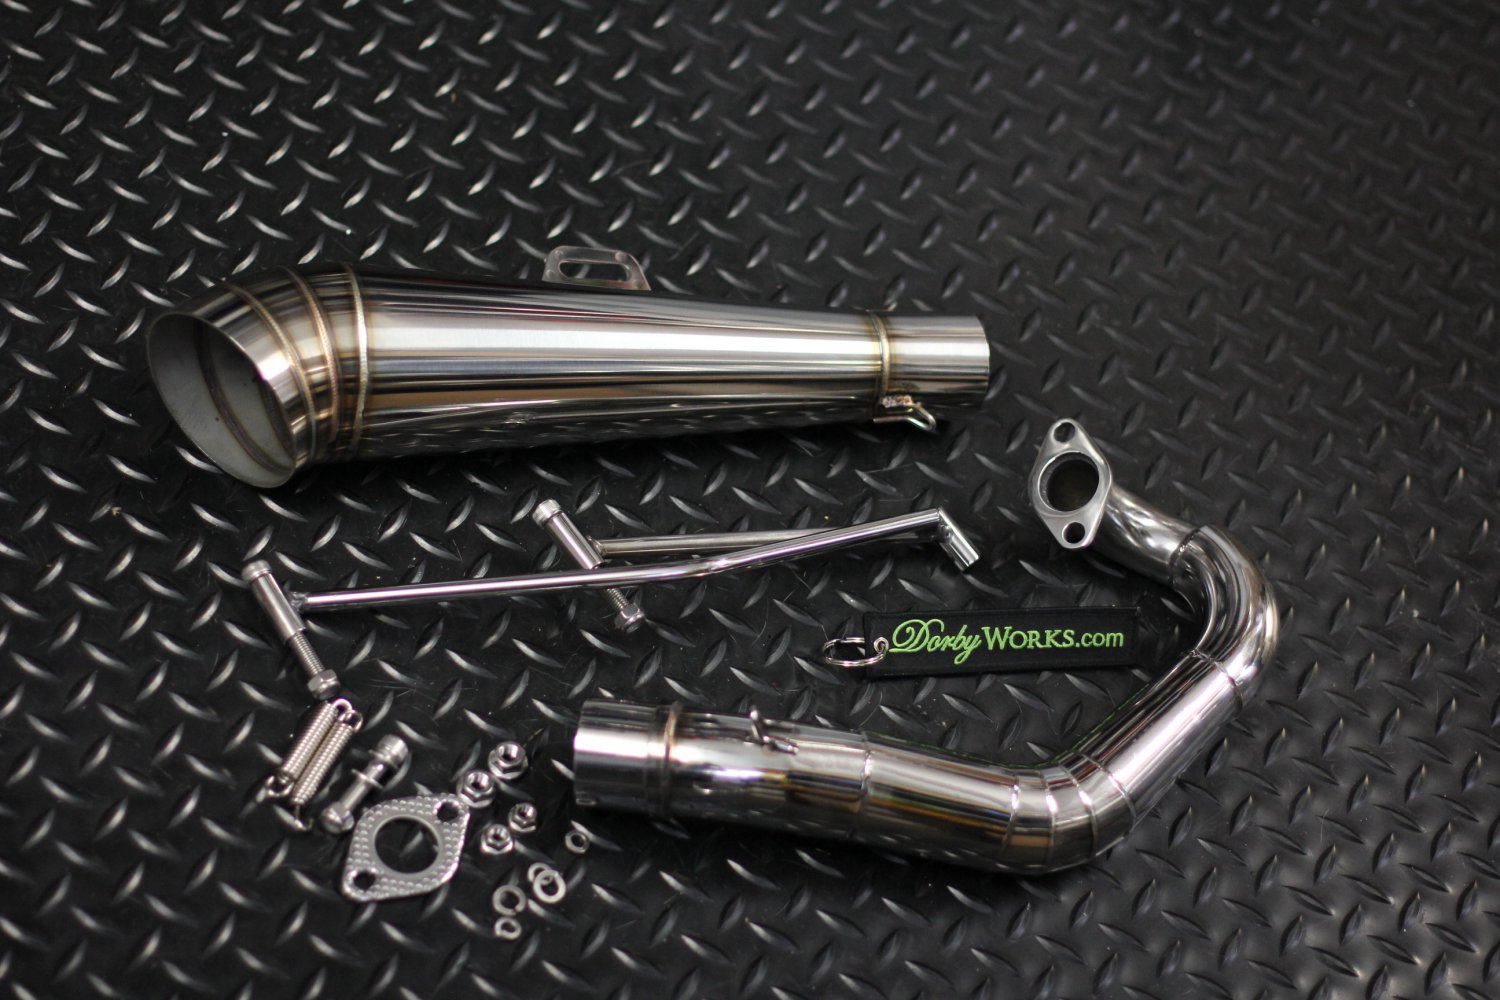 Honda Ruckus Overhead GY6 GP COMPLETE exhaust system bolt on - POLISHED